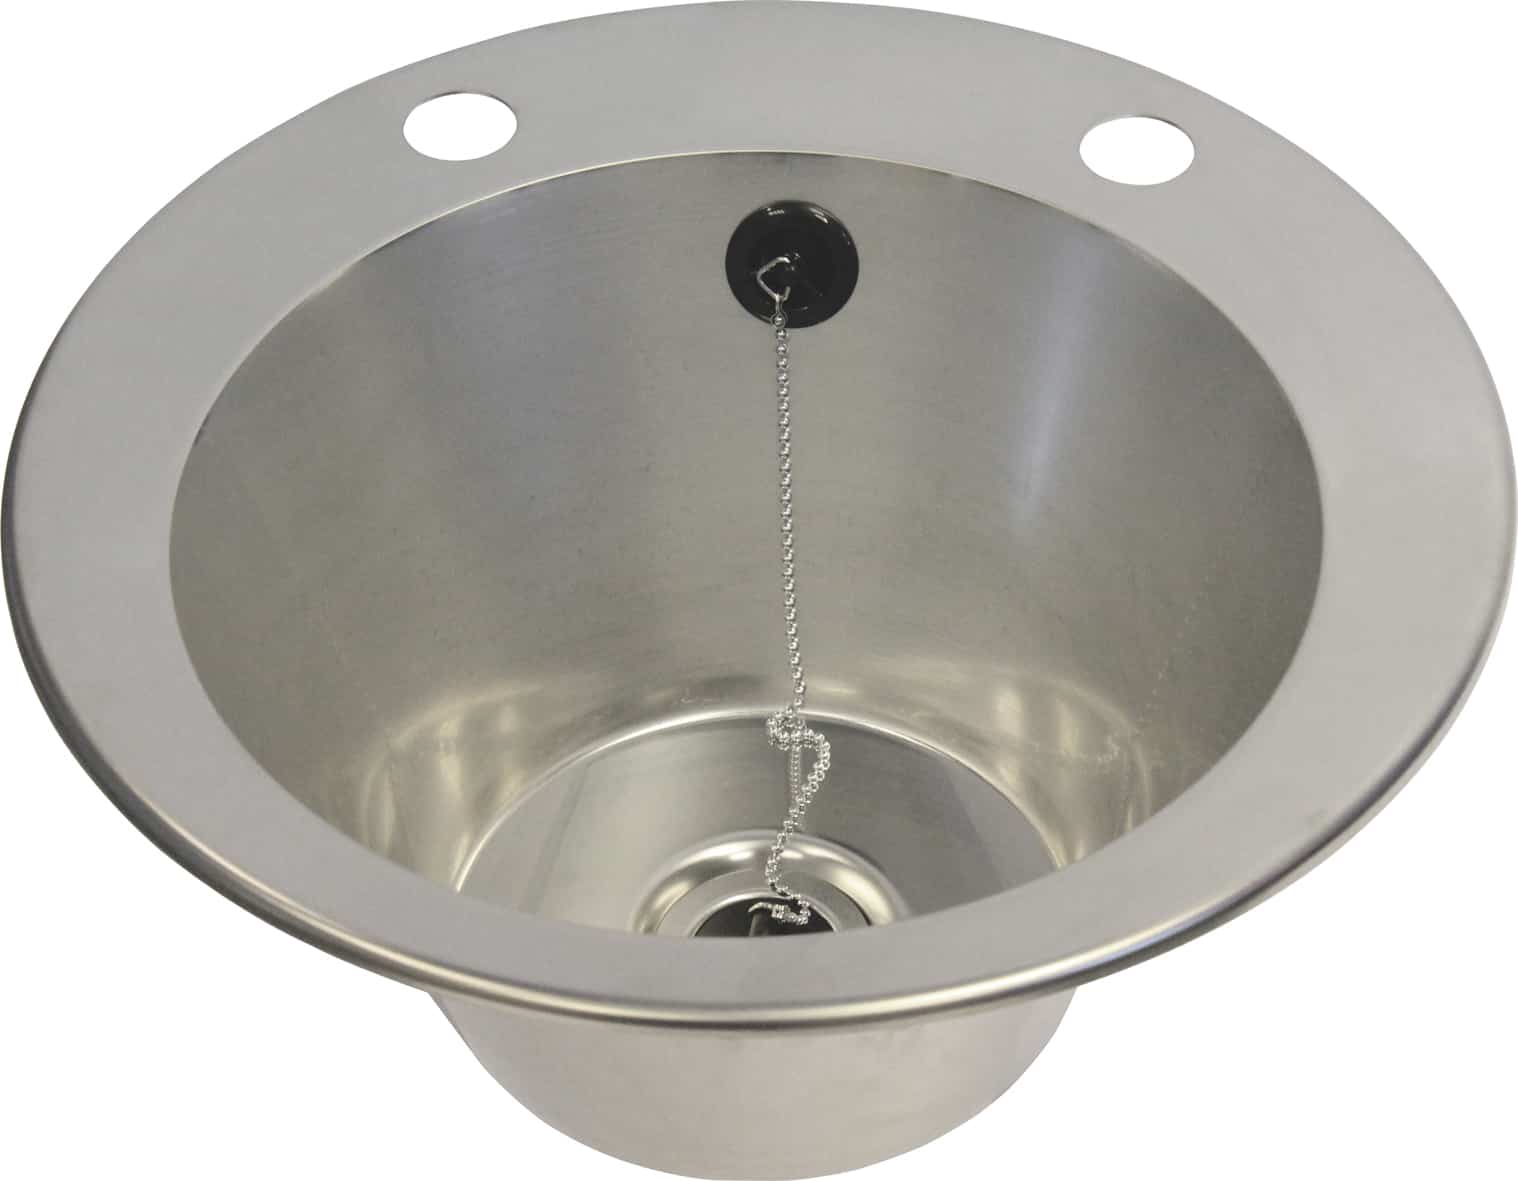 Stainless steel round inset basin